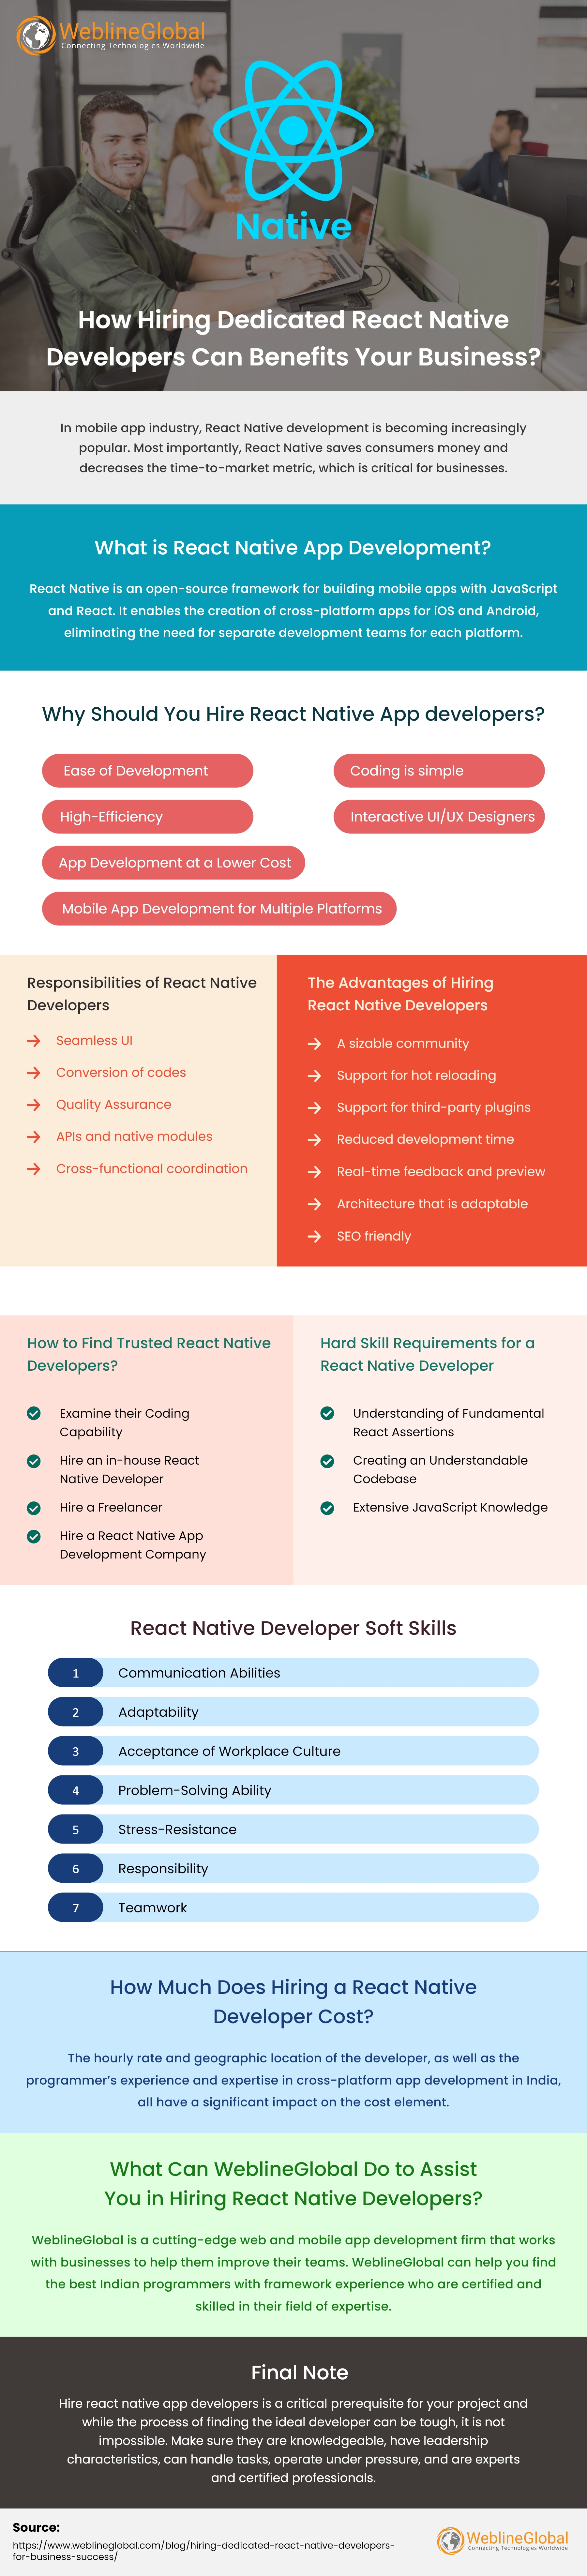 Hiring Dedicated React Native Developers For Business INFOGRAPHIC